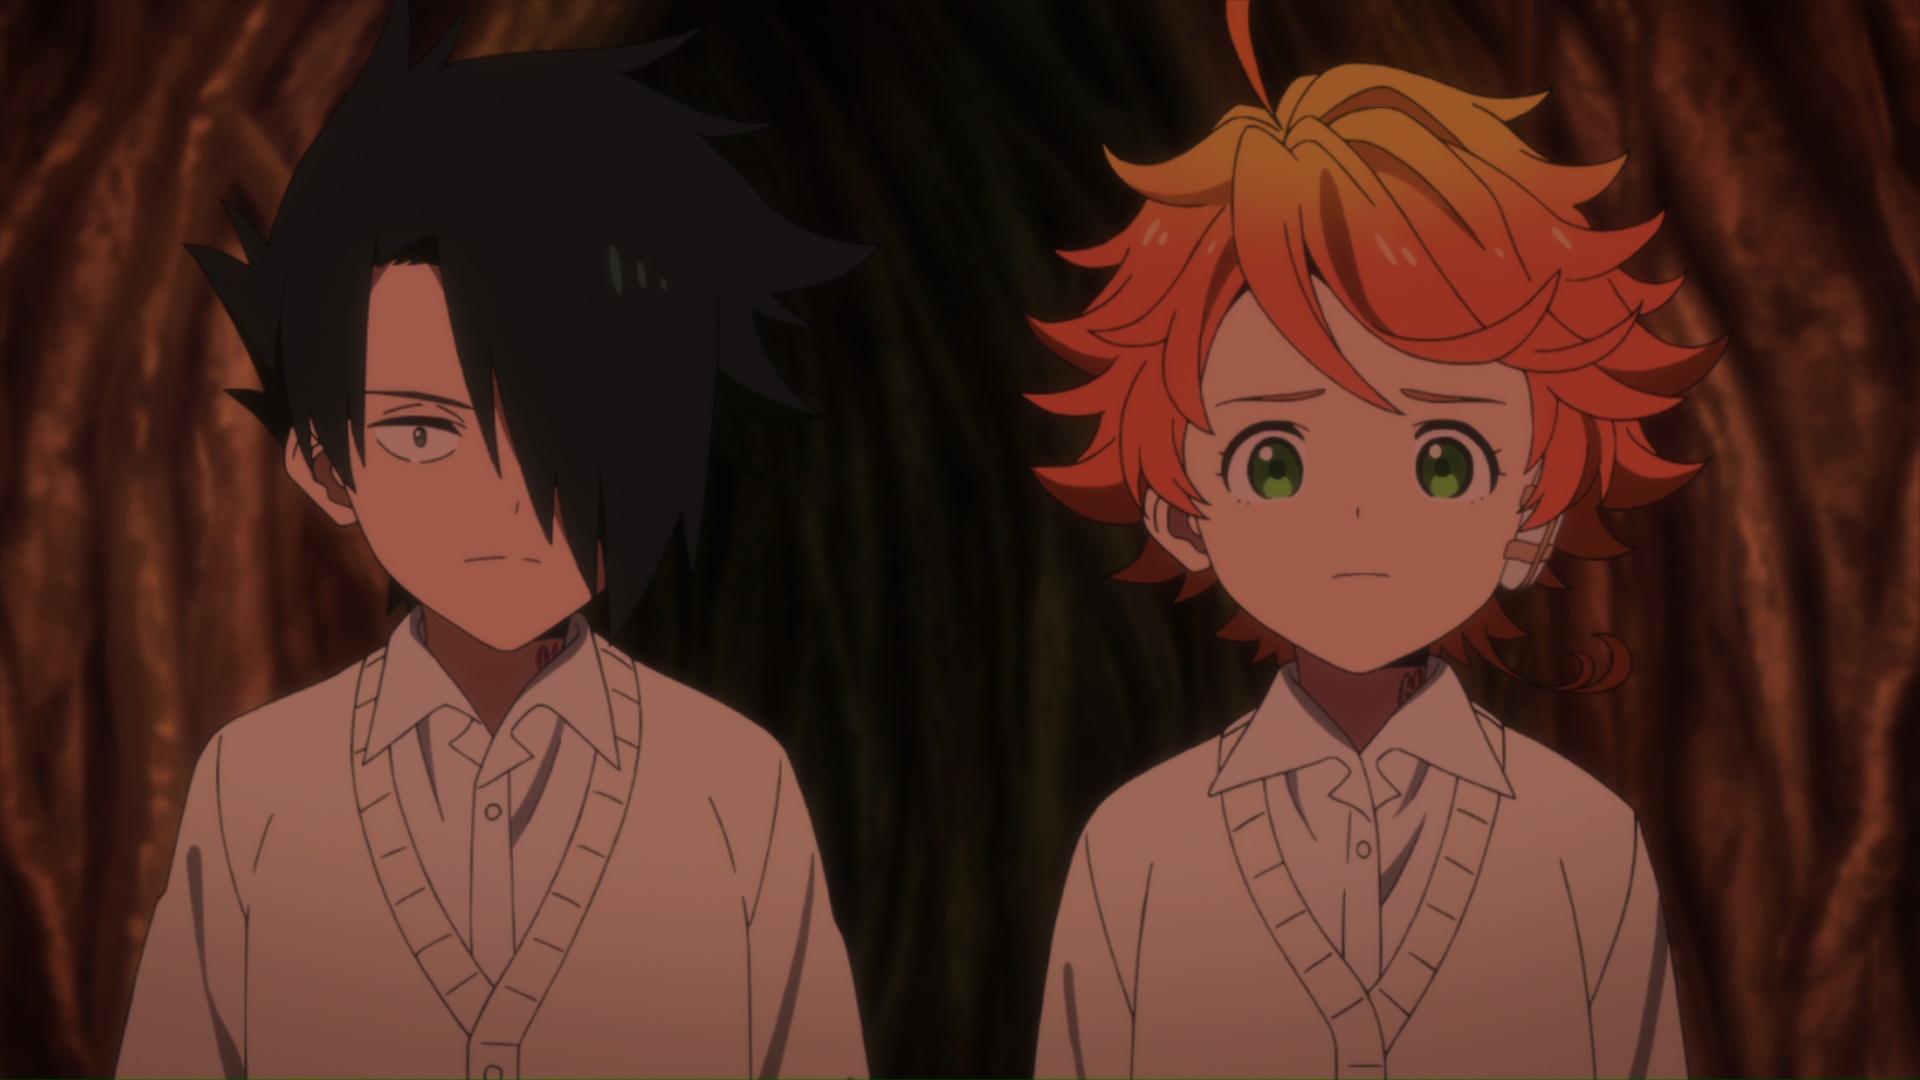 Watch The Promised Neverland Season 2 Episode 2 Sub And Dub Anime 